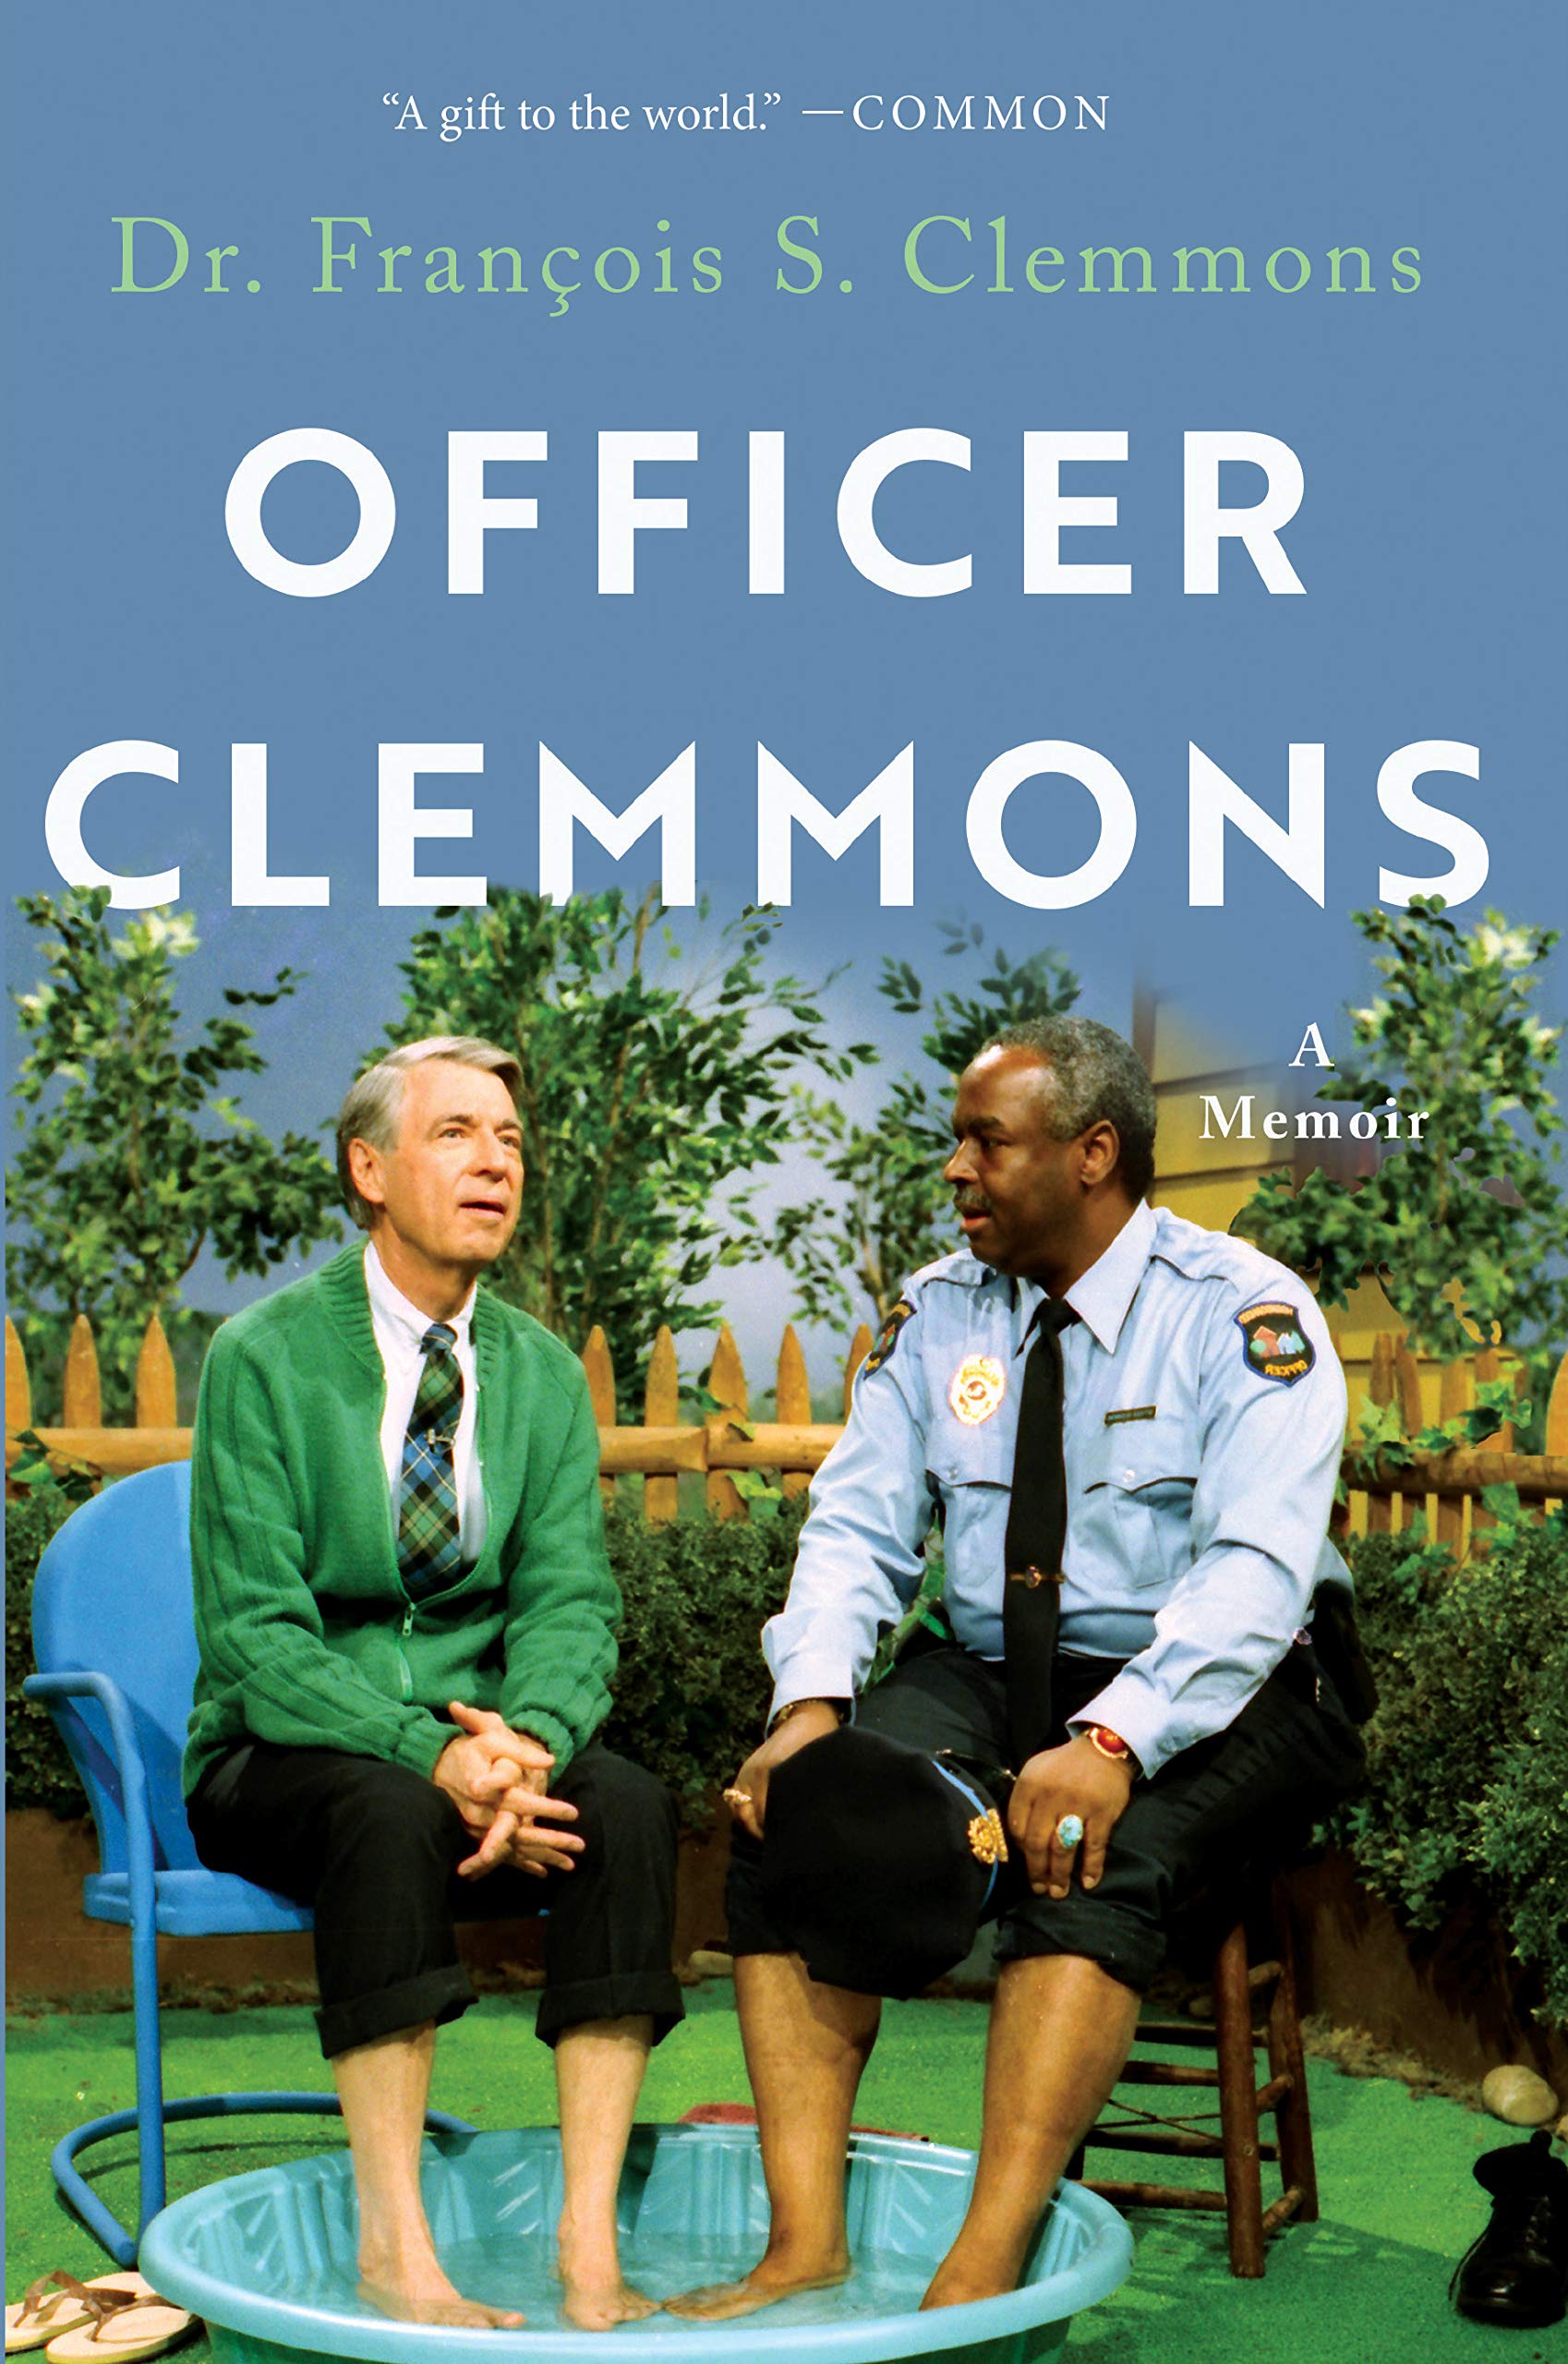 Image for "Officer Clemmons"